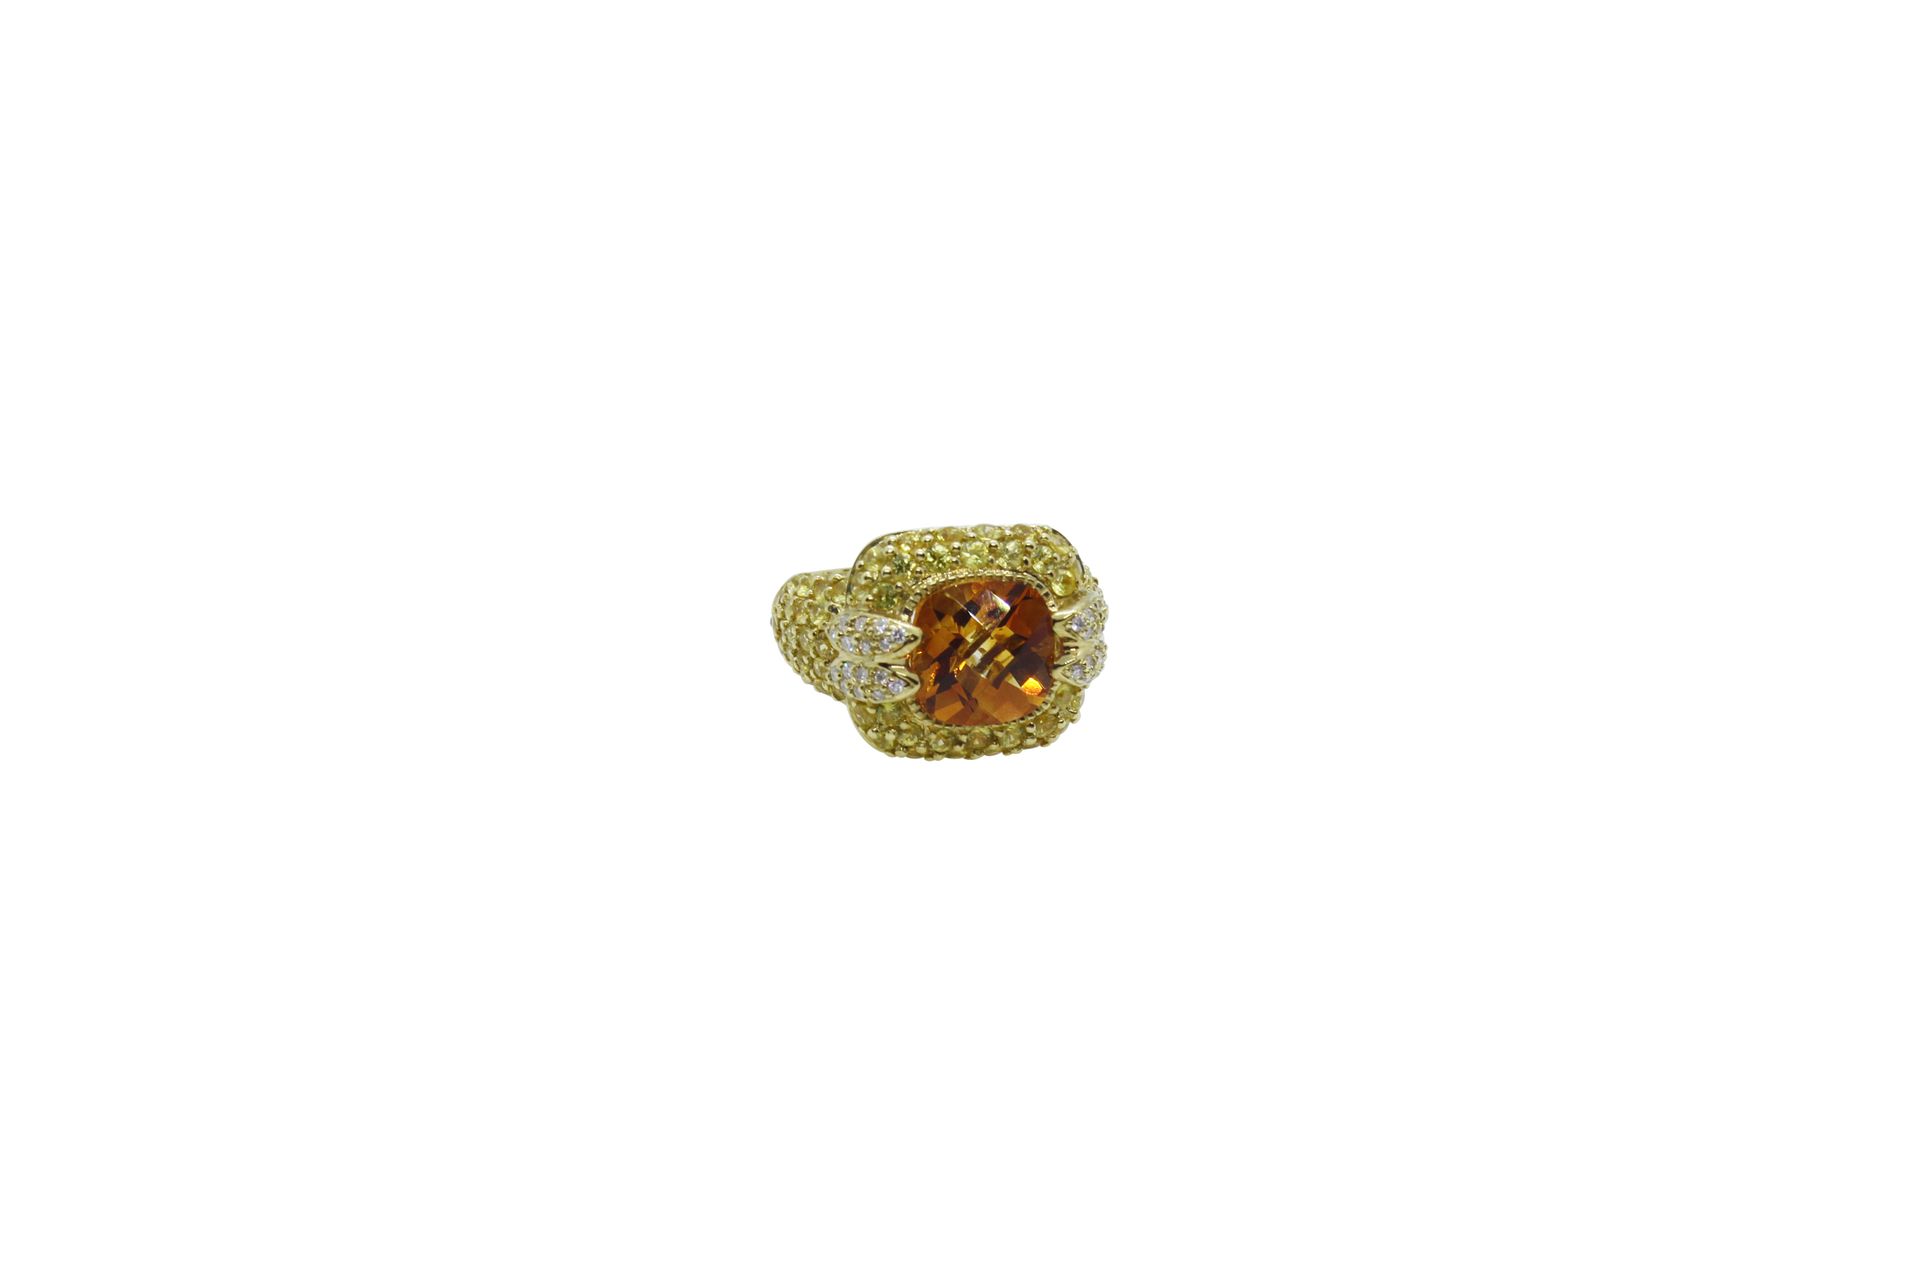 18k gold ring with yellow diamonds 18k gold ring with yellow diamonds. Gross wei&hellip;